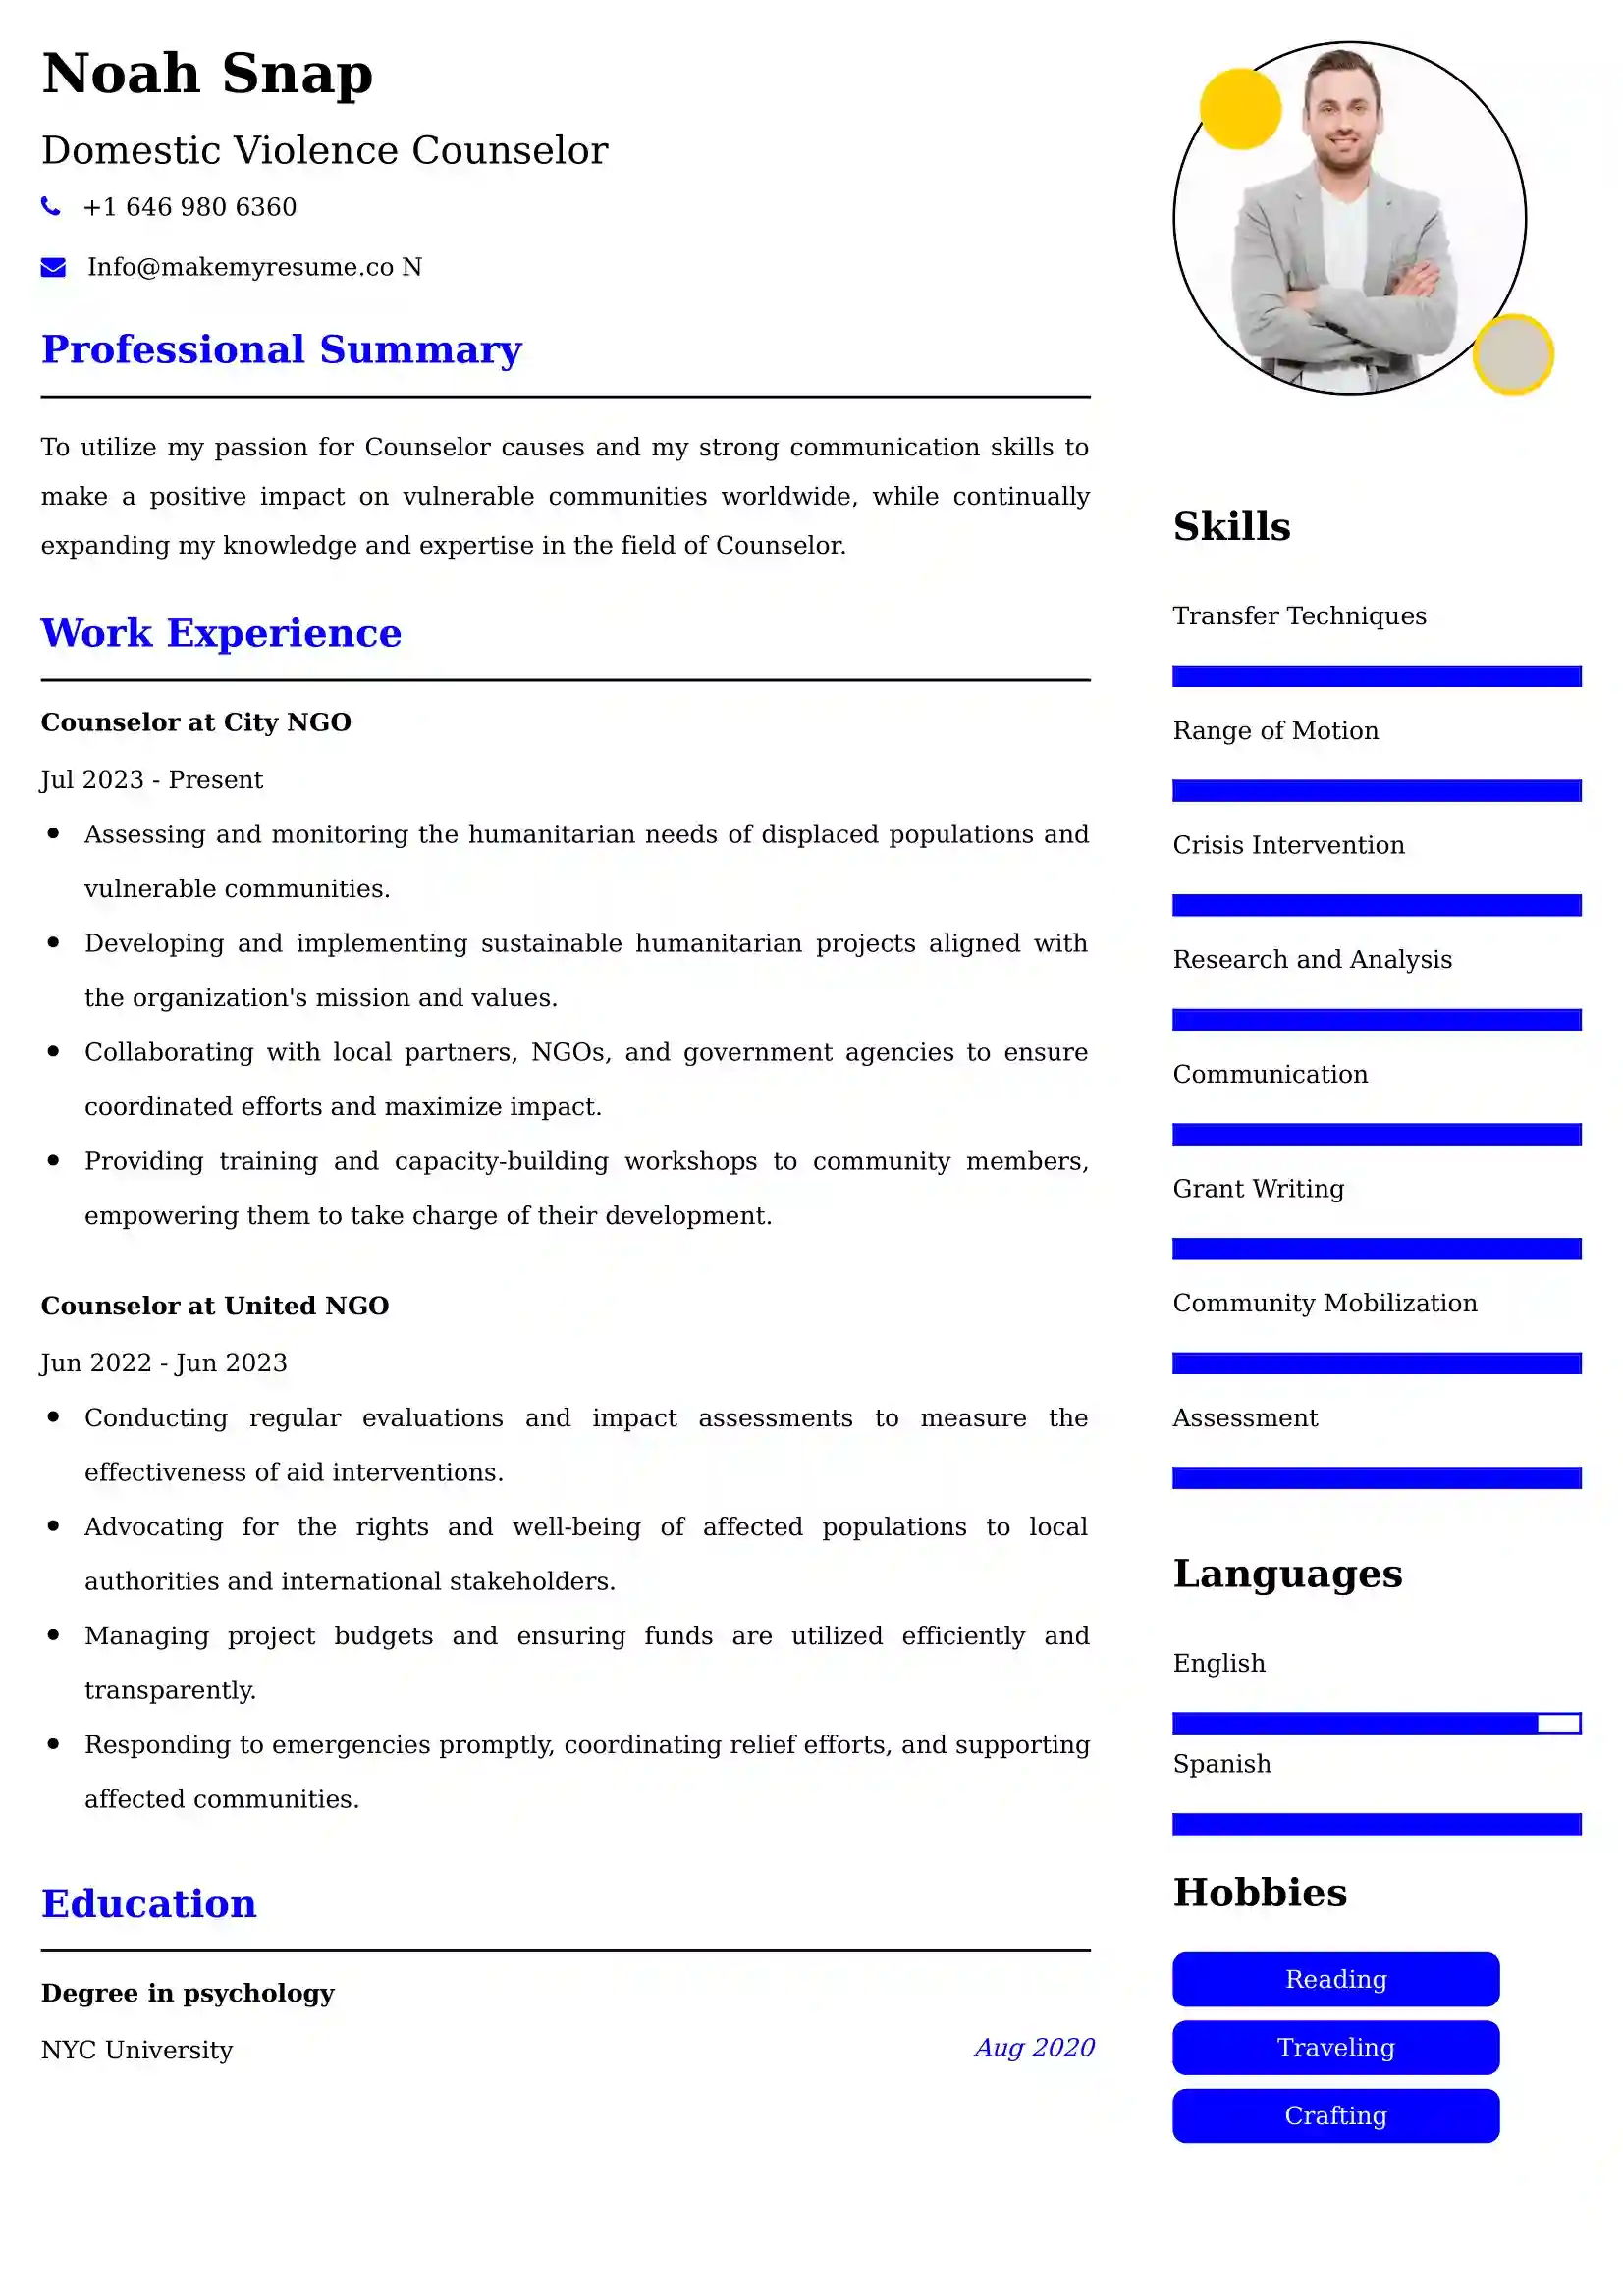 Best Counselor Resume Examples for UAE